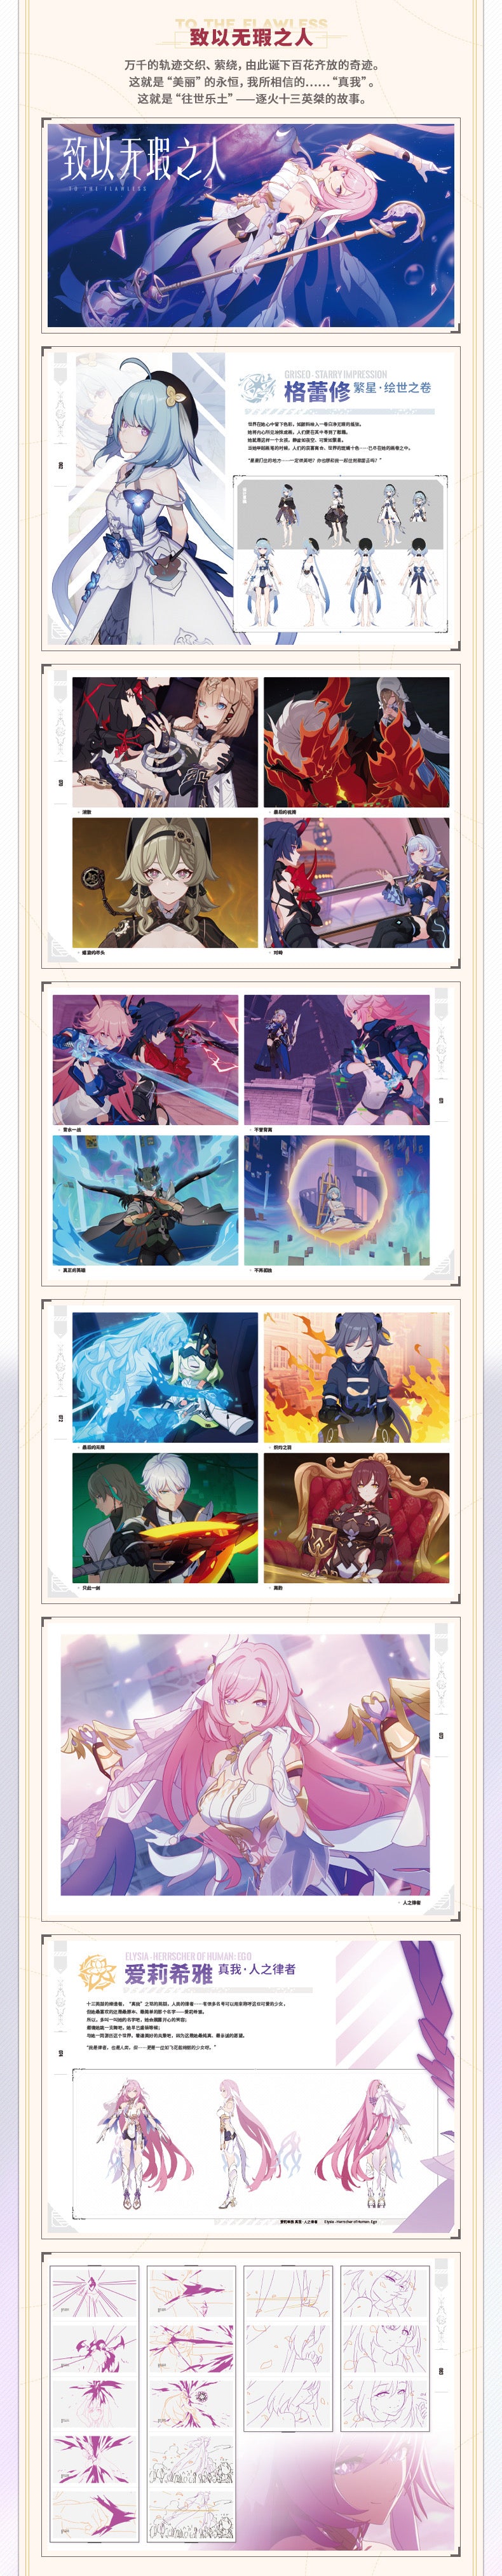 Honkai Impact 3rd - Original Art Book Collection - Vol 2 - The Origin and End of the Moon